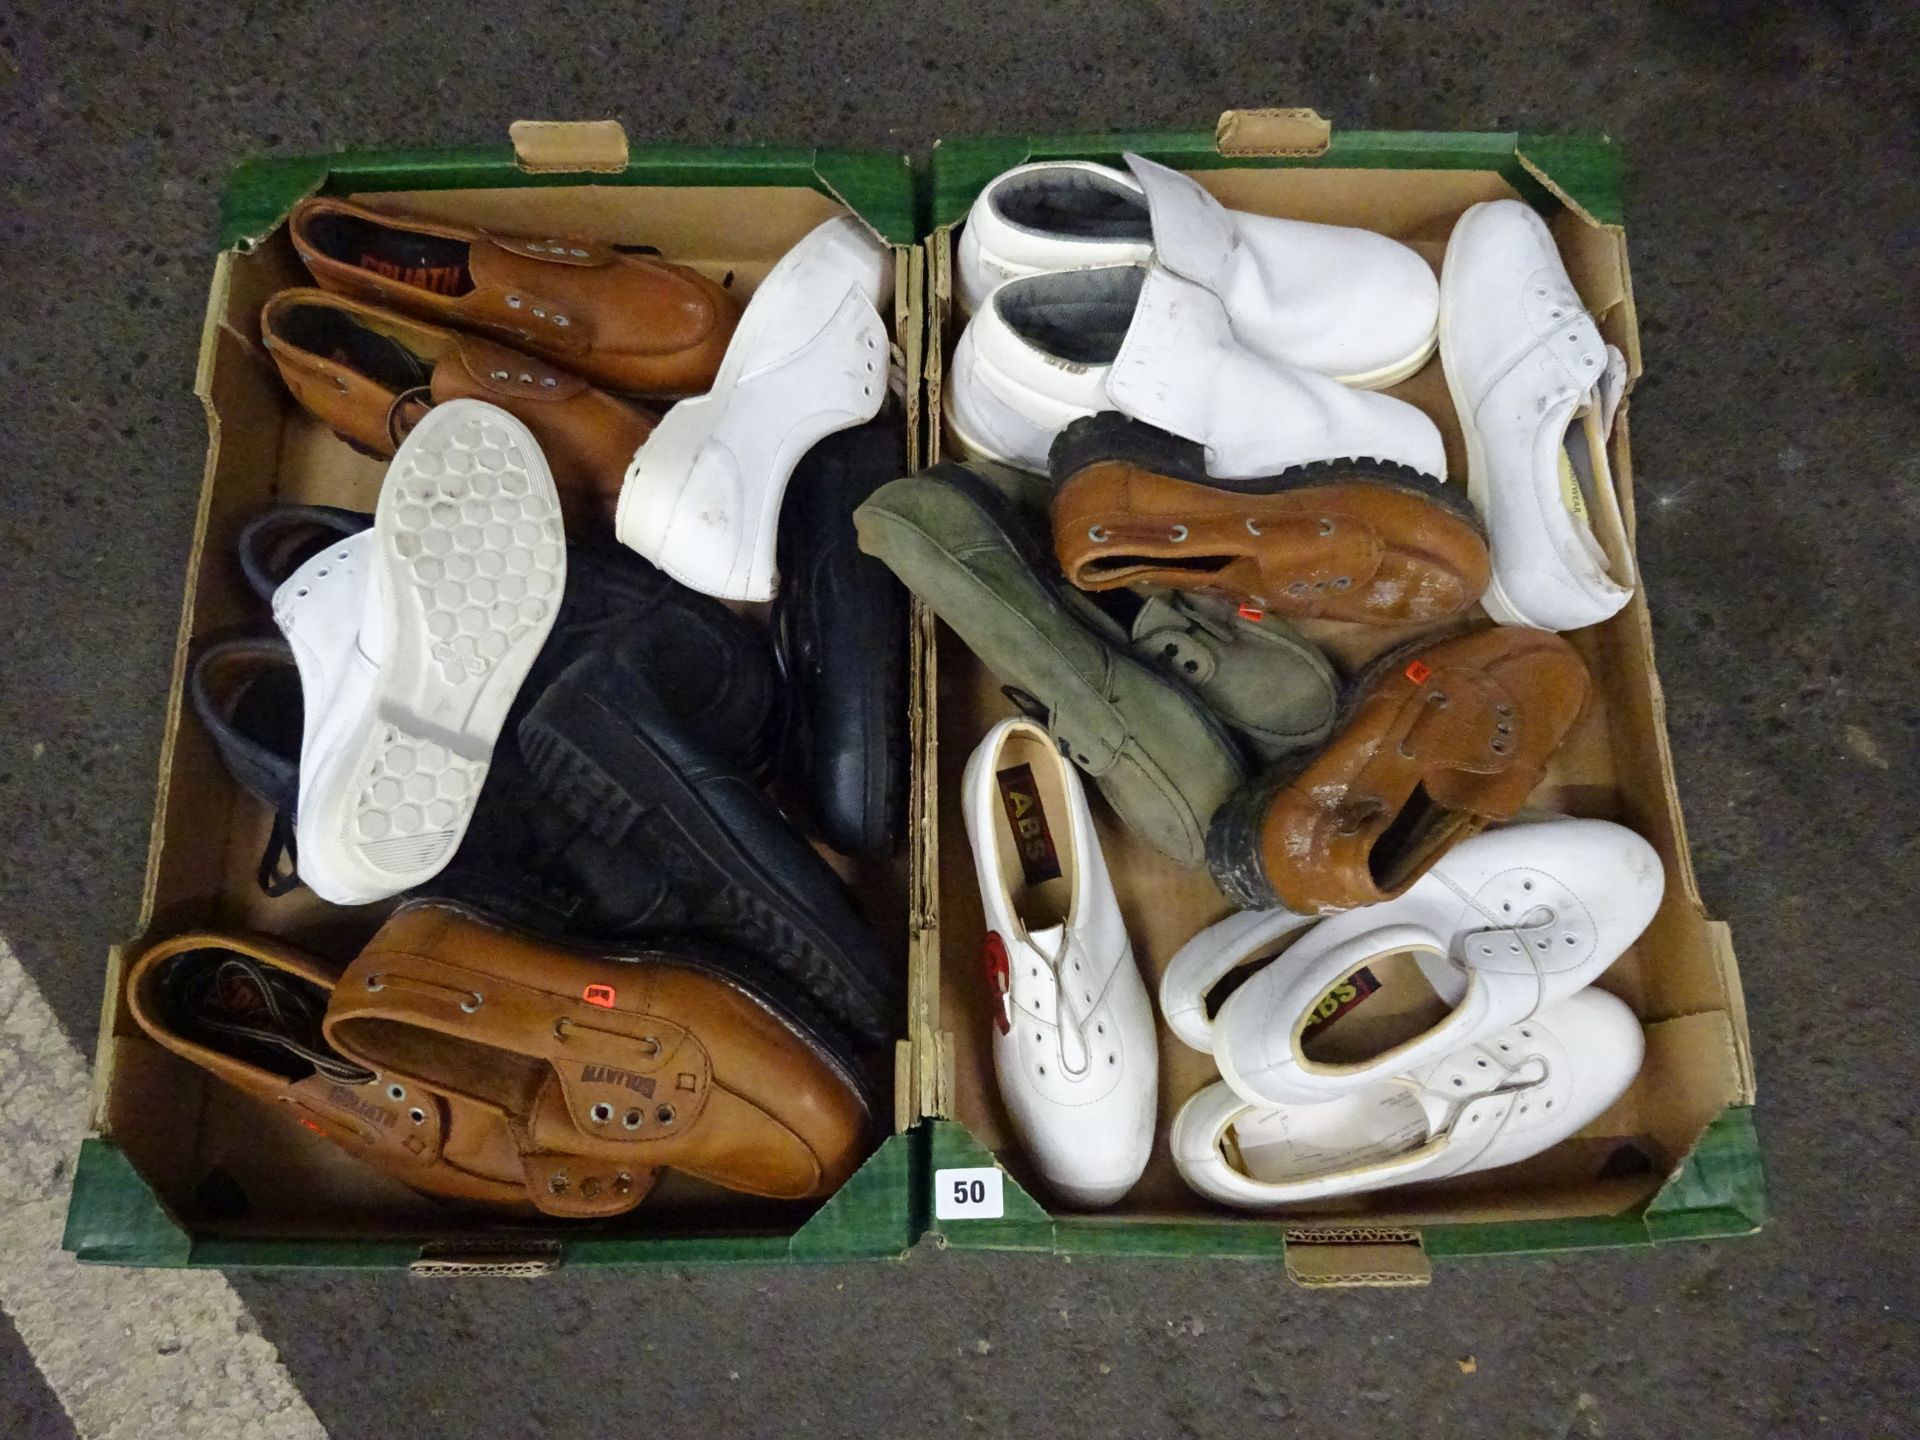 X2 BOXES OF WORKSHOES & WORK BOOTS (VARIETY OF DESIGNS & SIZES)